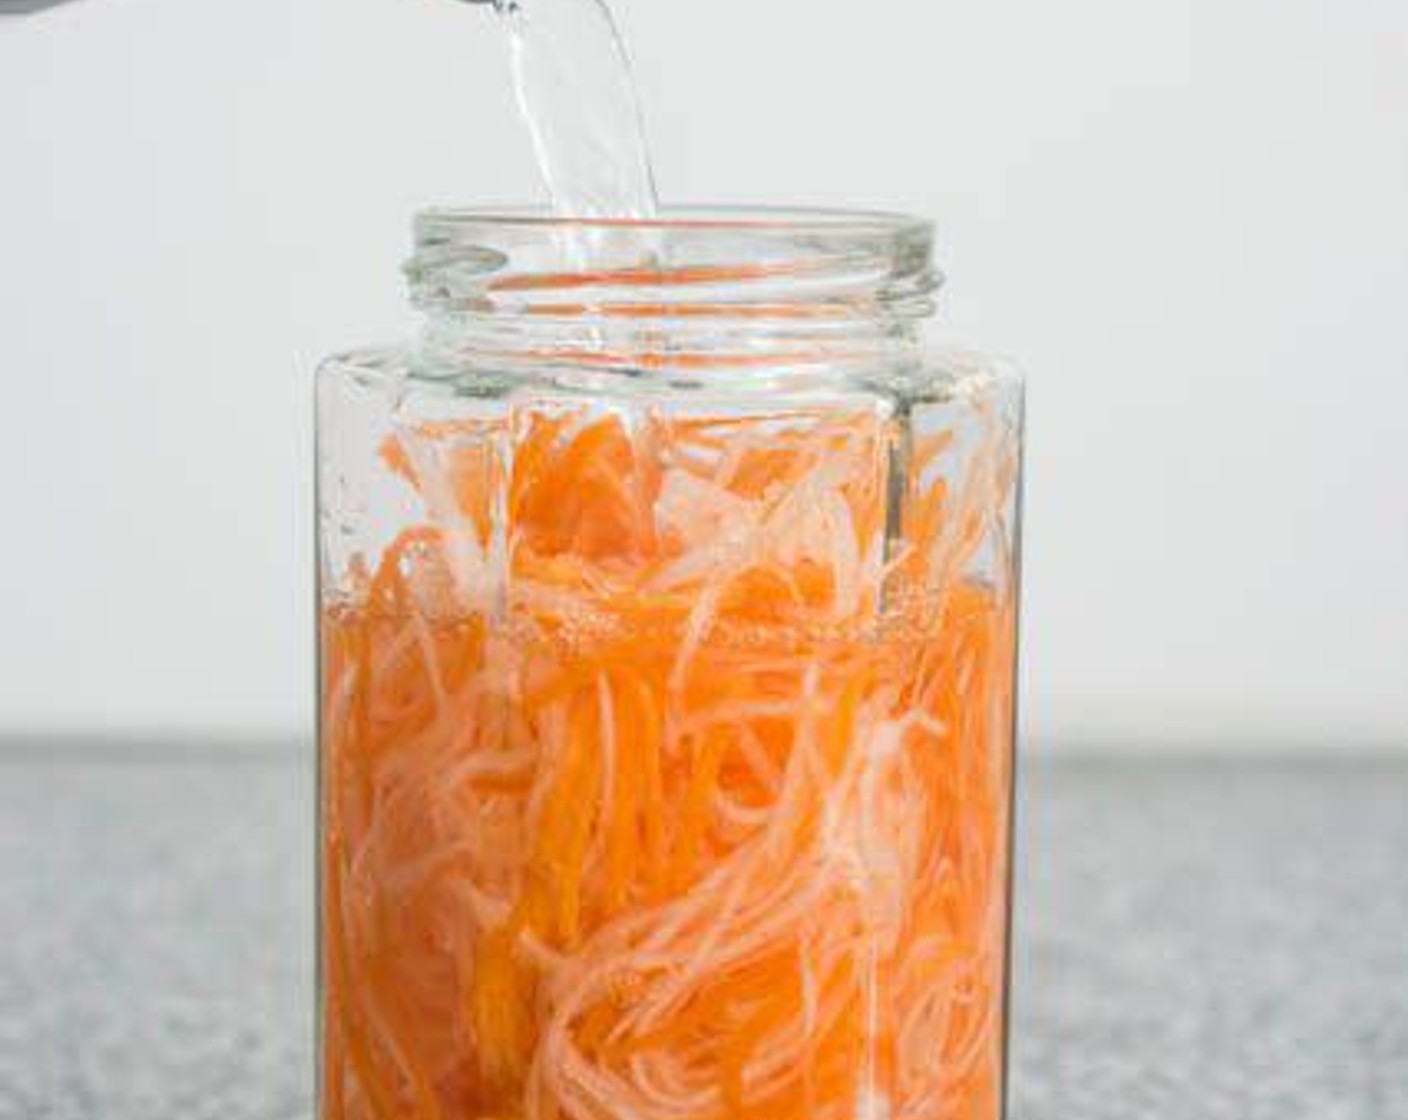 step 1 Make the pickled carrot and radish: Place the Carrot (1 cup) and Daikon Radish (1 cup) in a jar. Fill the jar with Distilled White Vinegar (1 cup), Water (3/4 cup), and Granulated Sugar (1/4 cup).